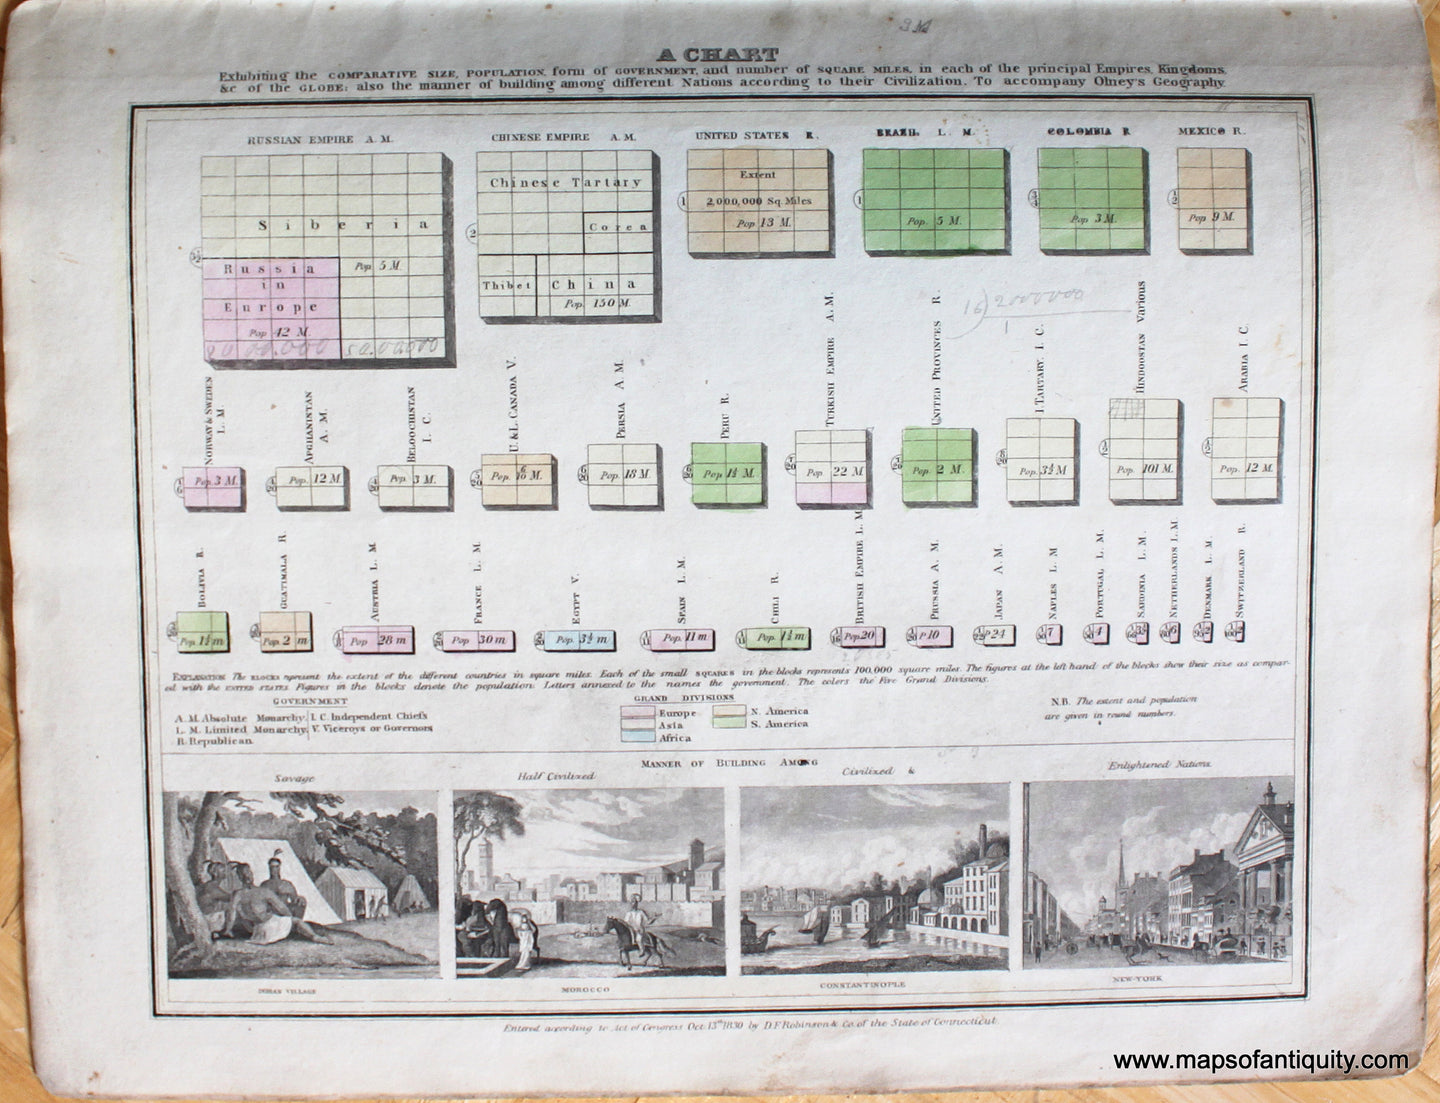 Genuine-Antique-Comparative-Chart-A-Chart-Exhibiting-the-Comparative-Size,-Population,-form-of-Government,-and-number-of-Square-Miles-in-each-of-the-principal-Empires,-Kingdoms,-&c-of-the-Globe,-also-the-manner-of-building-among-different-Nations-according-to-their-Civilization.-1830-E.-Huntington-/-D.F.-Robinson-&-Co.-Maps-Of-Antiquity